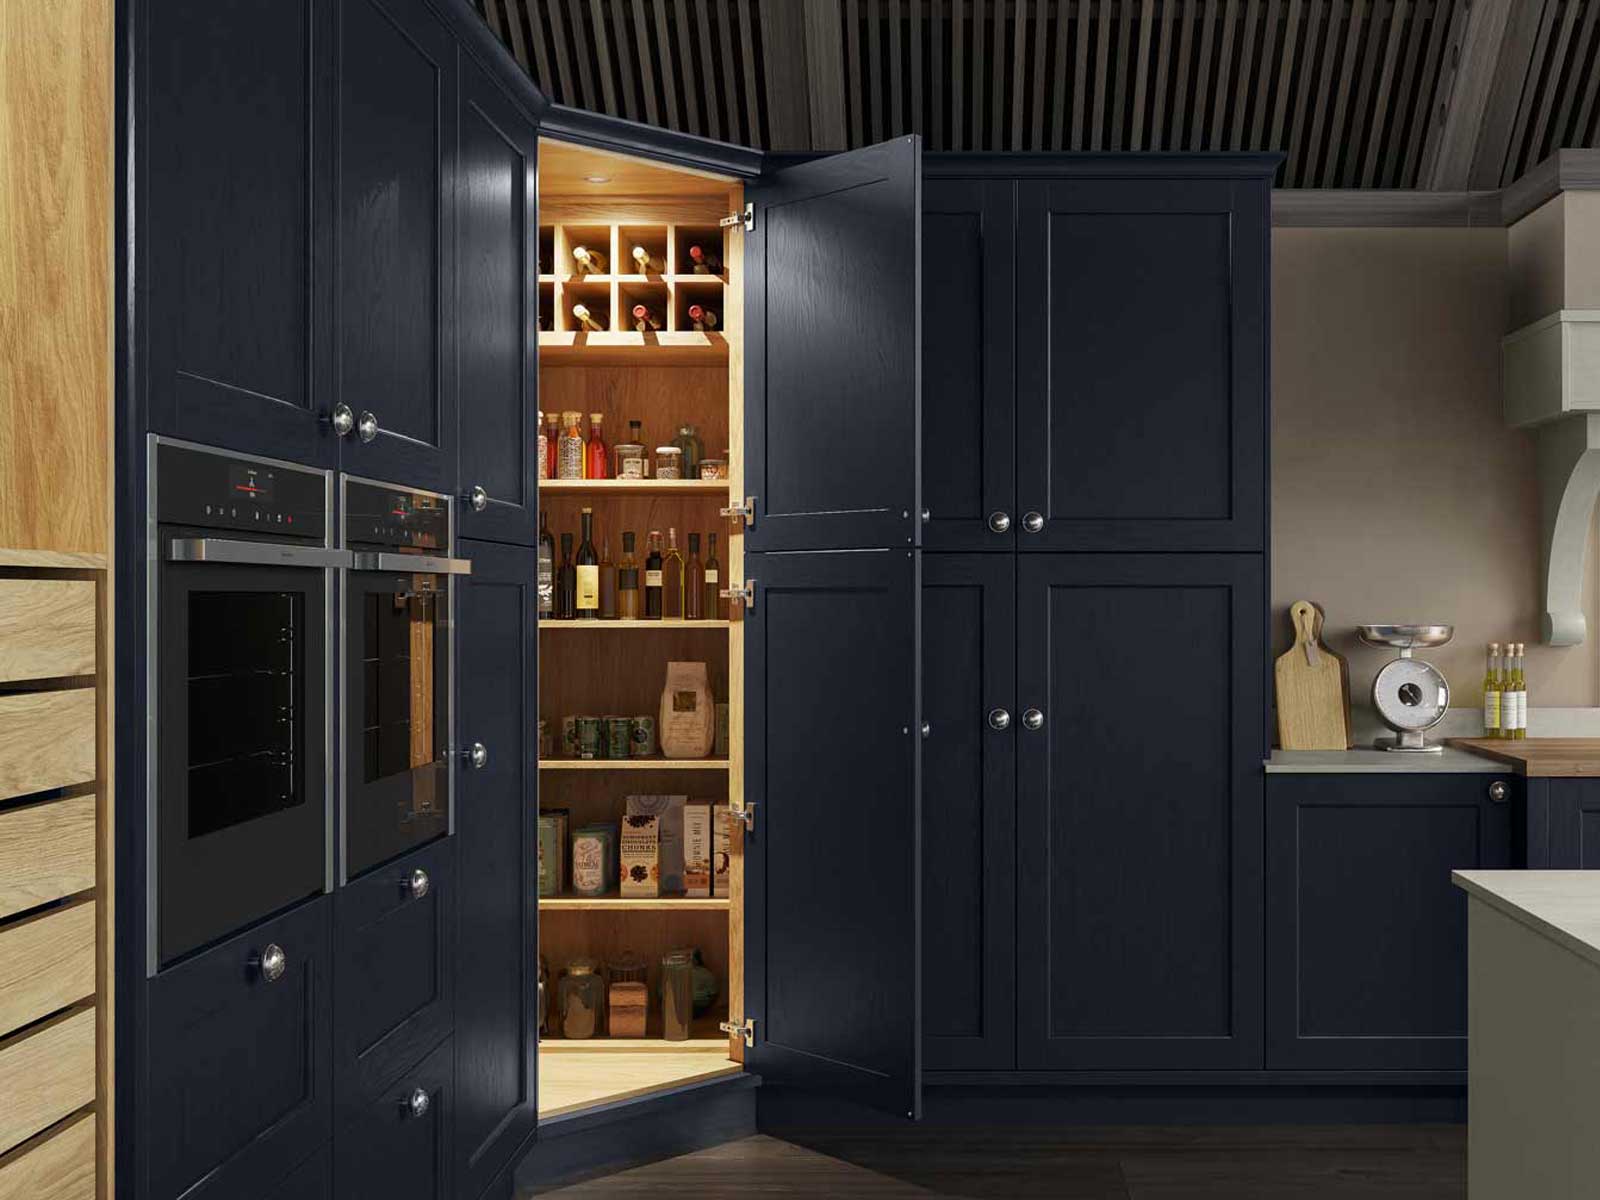 A walk-in kitchen pantry demonstrating excellent blue kitchen cabinet ideas